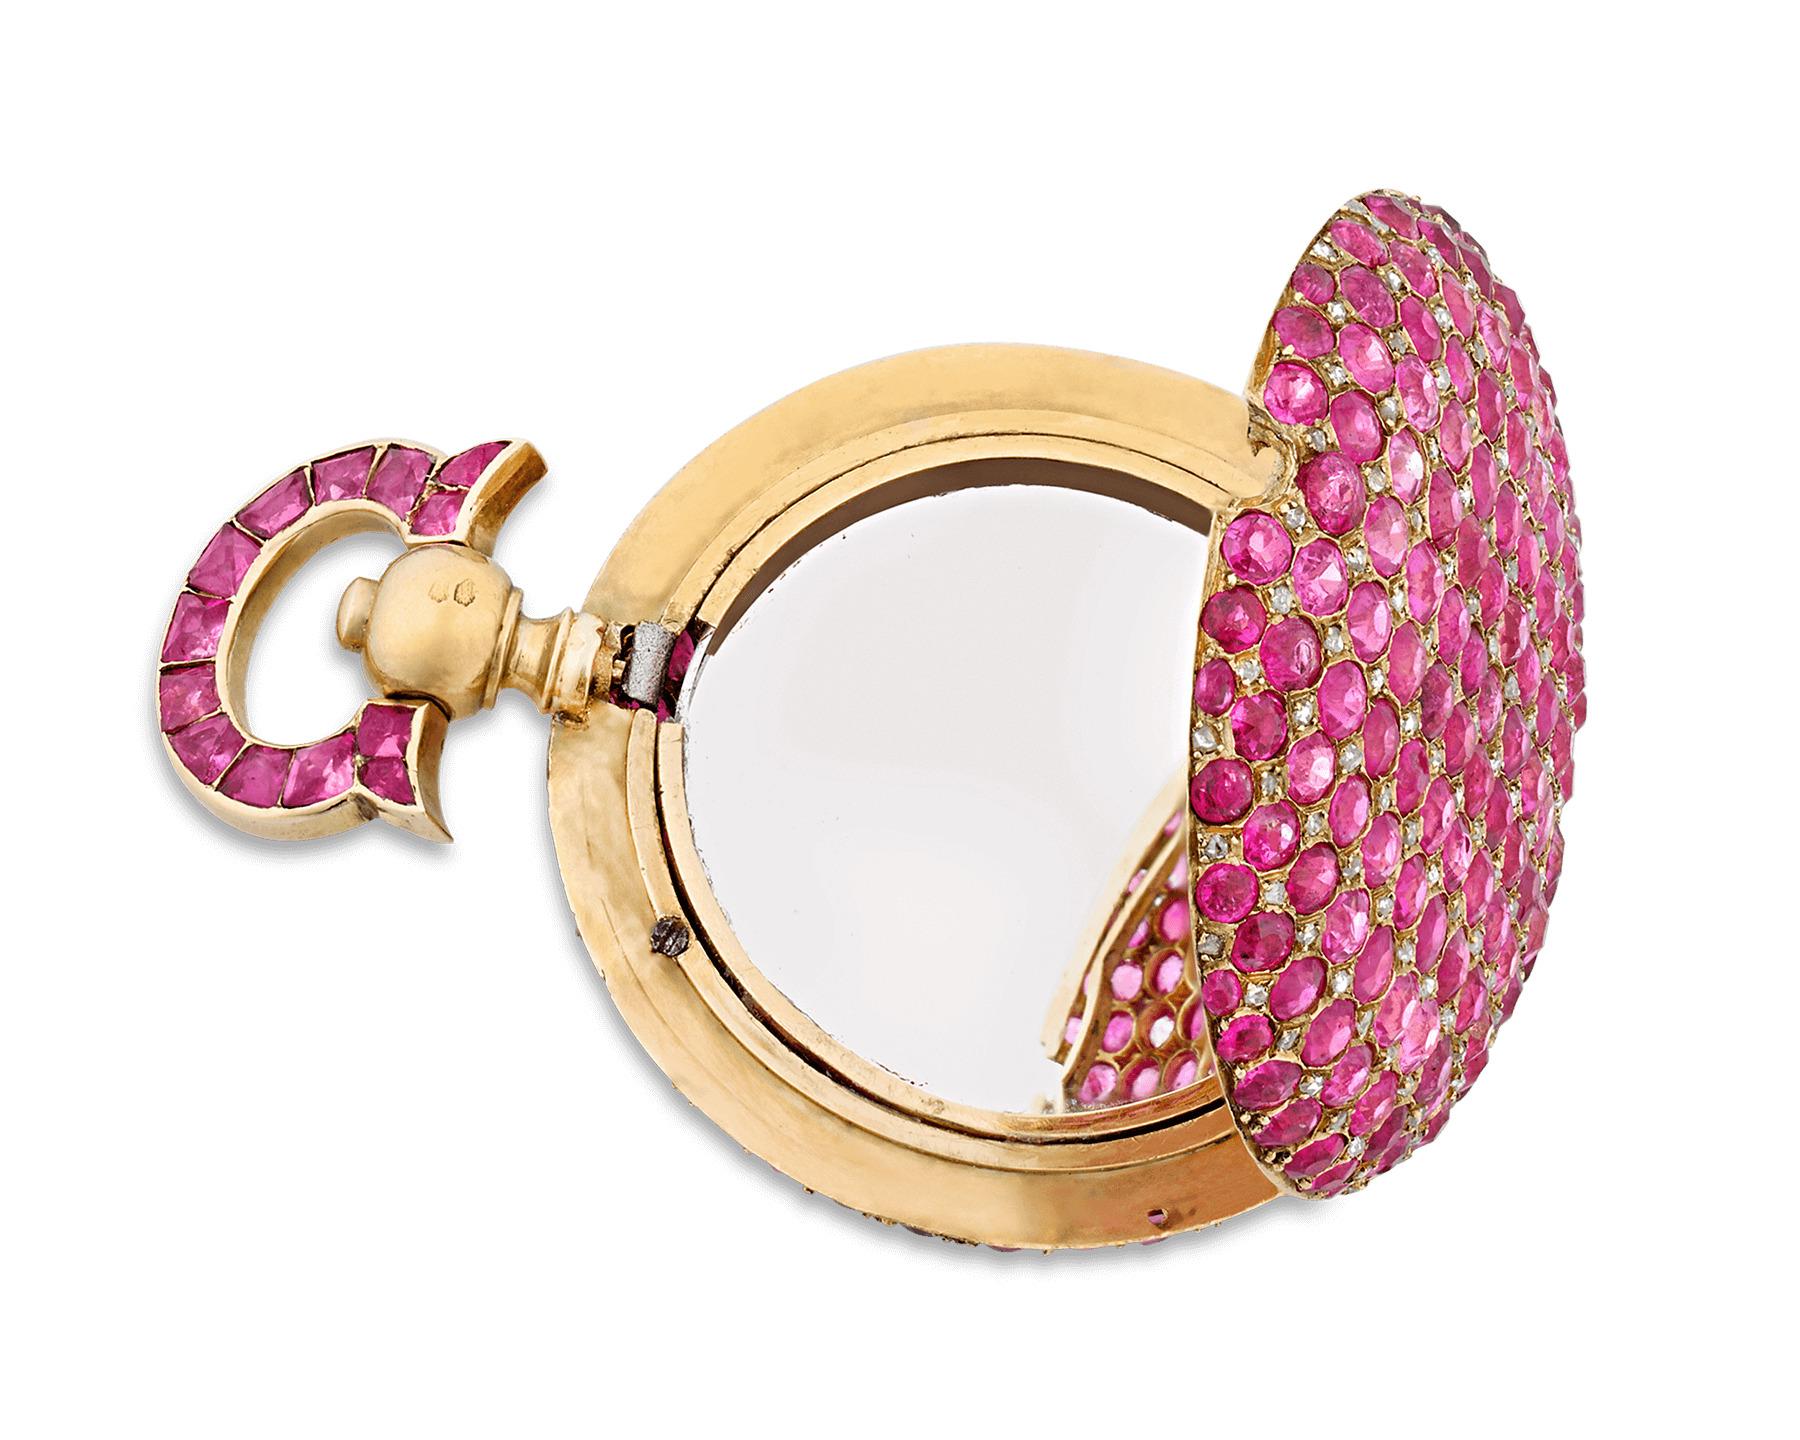 This delicate-yet-stunning locket is adorned by approximately 240 dazzling red ruby cabochons. Crafted of 14K yellow gold, the gorgeous rubies encrusting this locket weigh approximately 7.00 carats total. Open up this surprising pendant to reveal a